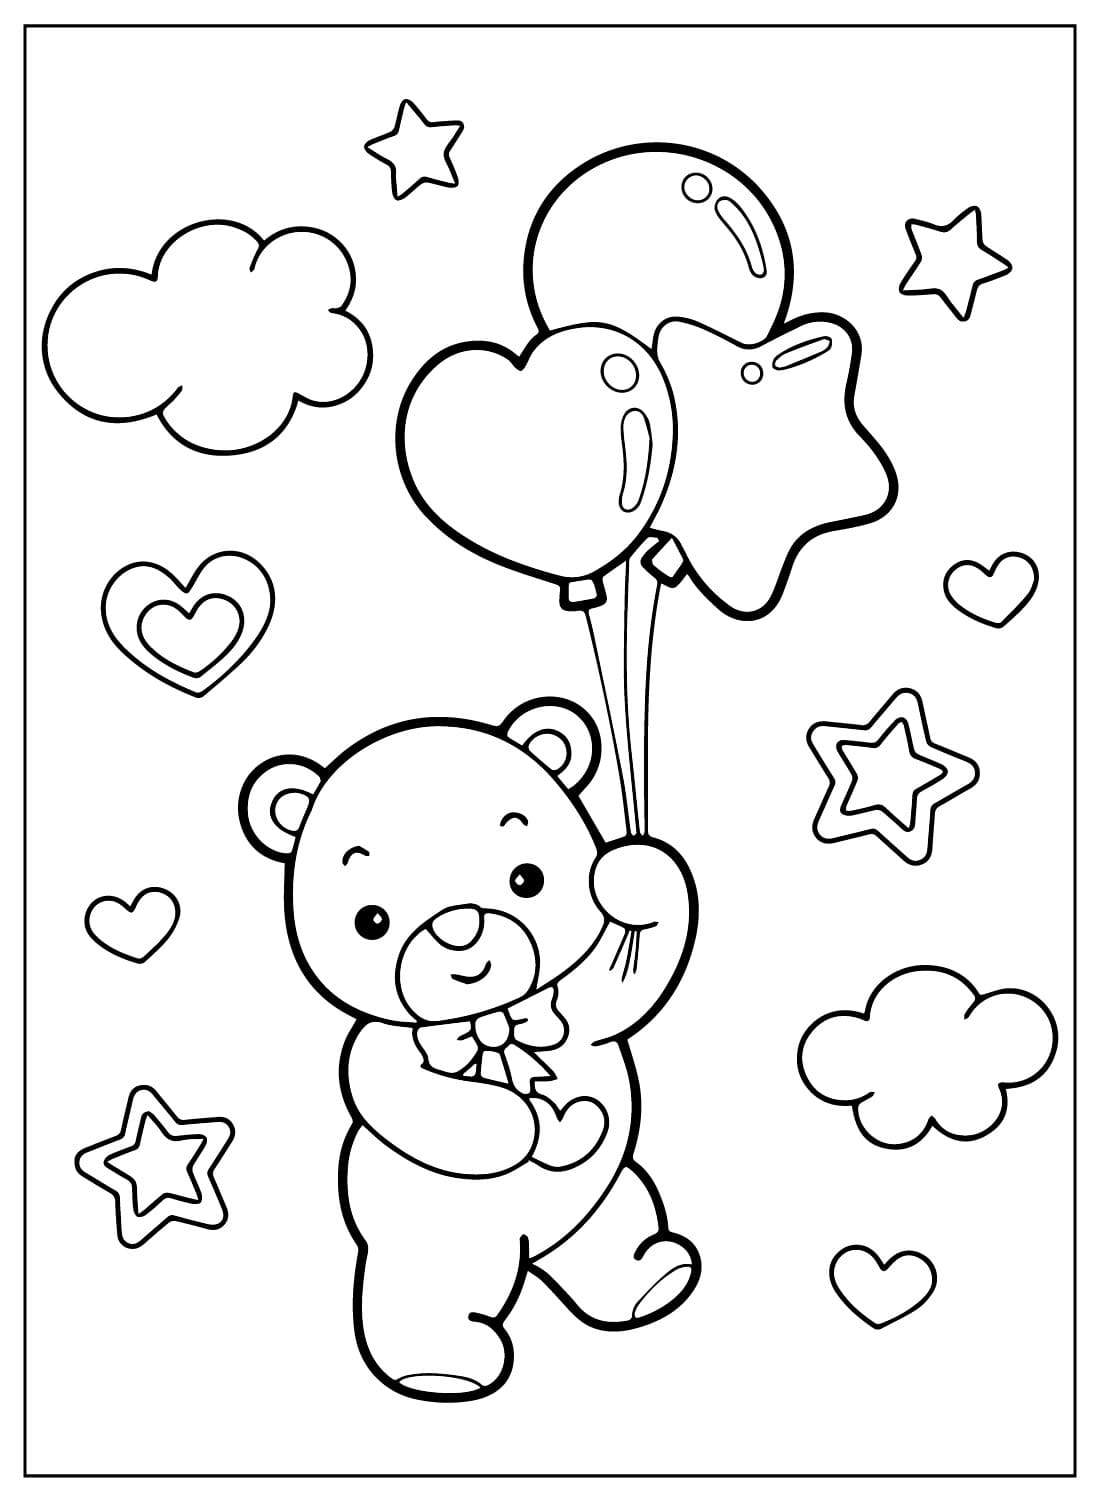 Free Printable Teddy Bear Coloring Page